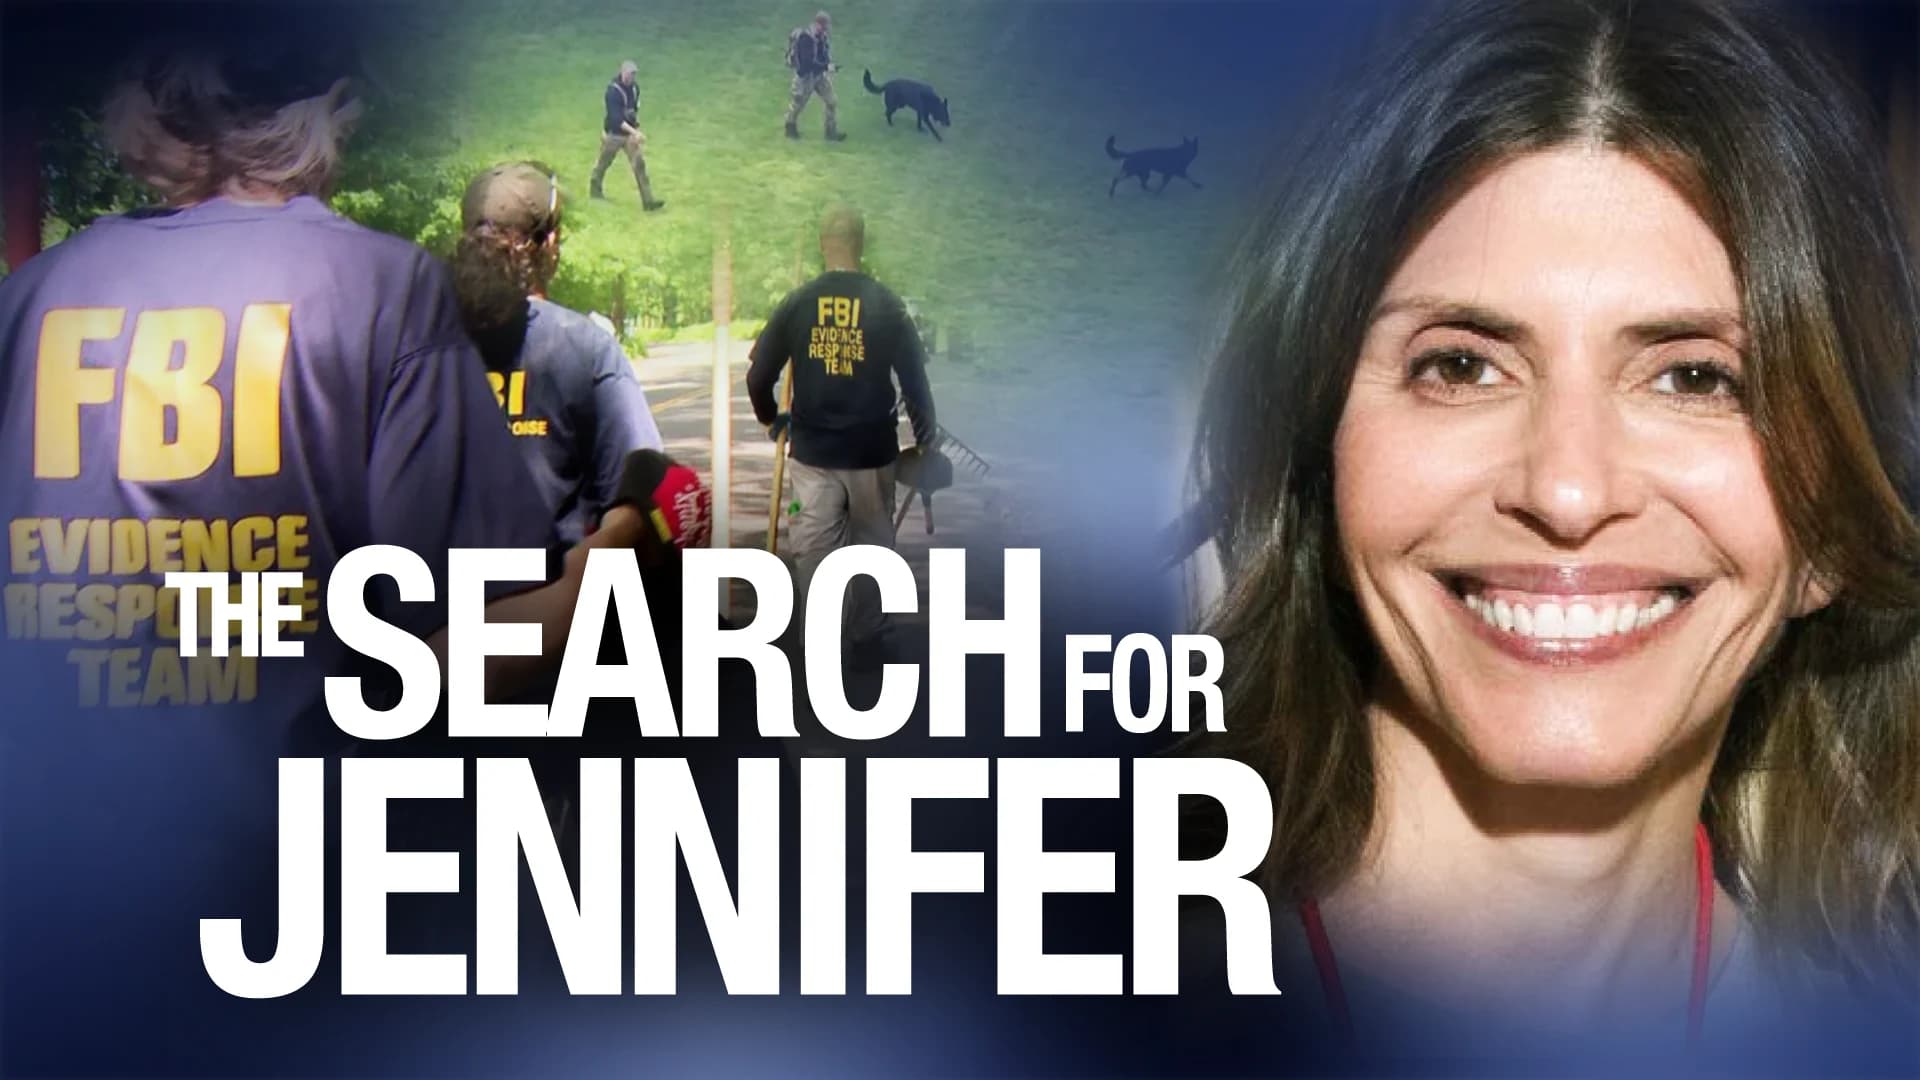 Live Notebook from the Jennifer Dulos Case